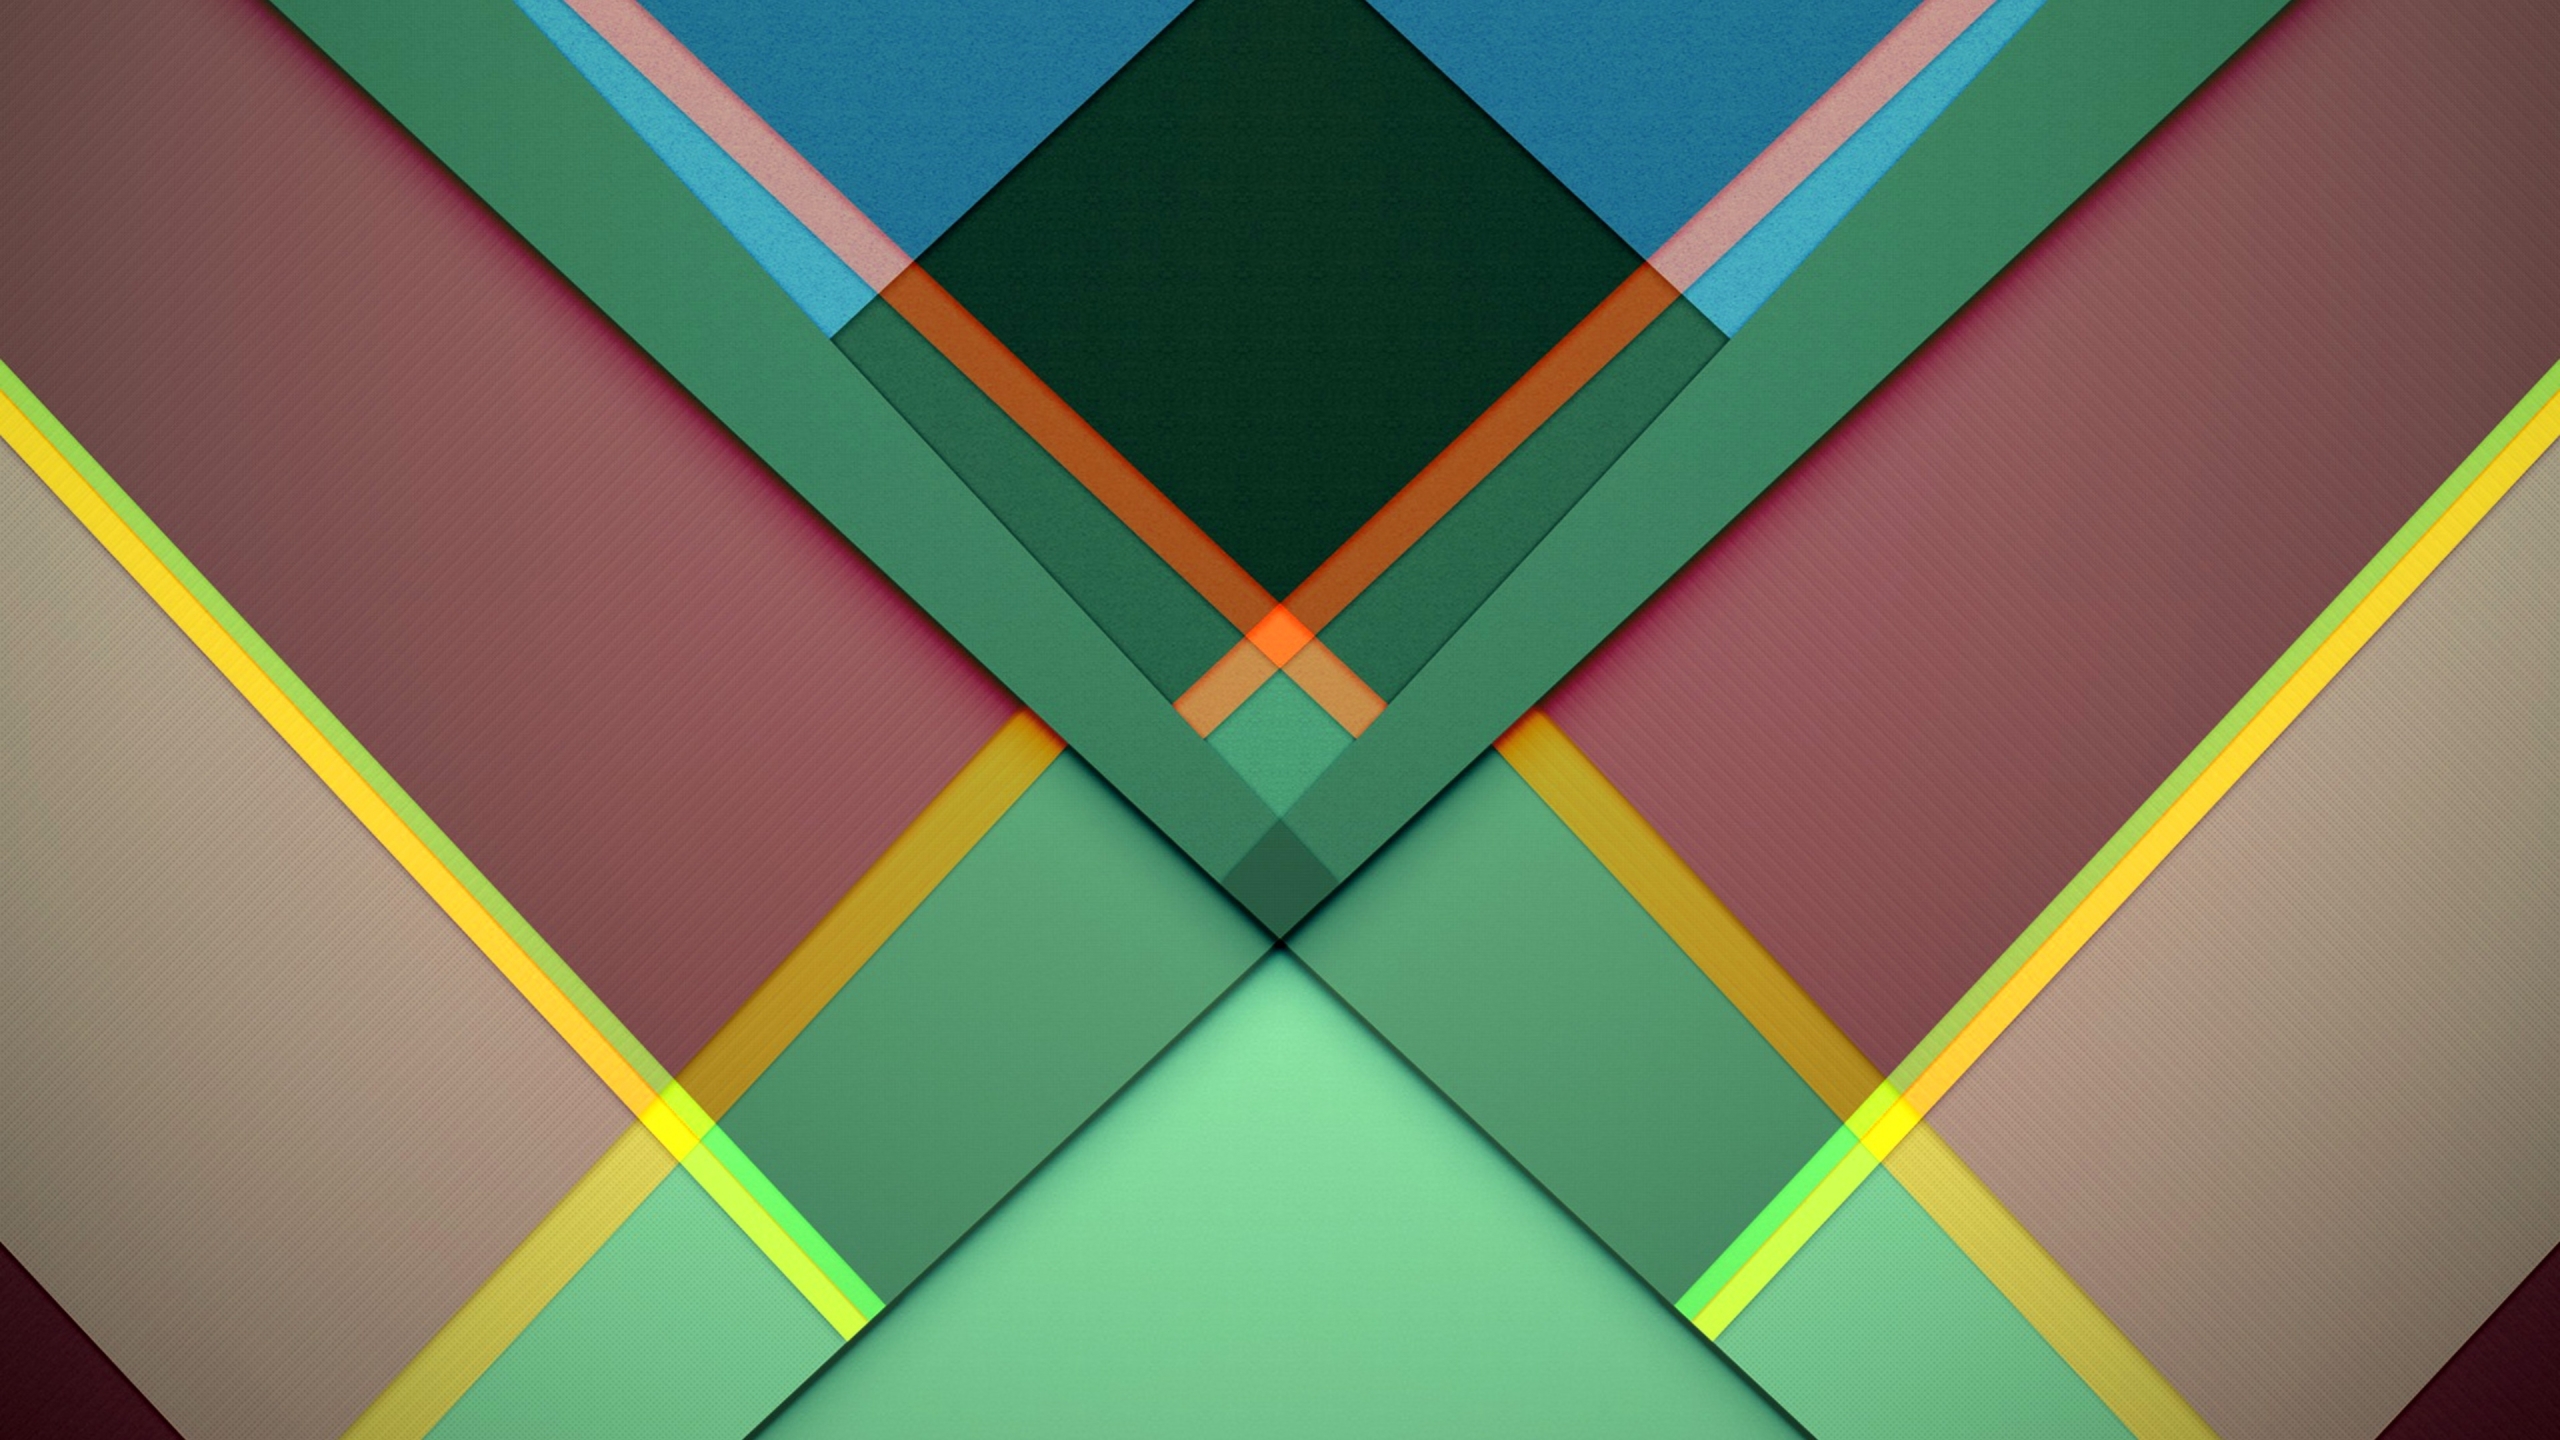 2560x1440 Resolution Geometry Abstract Lines 1440P Resolution Wallpaper - Wallpapers Den